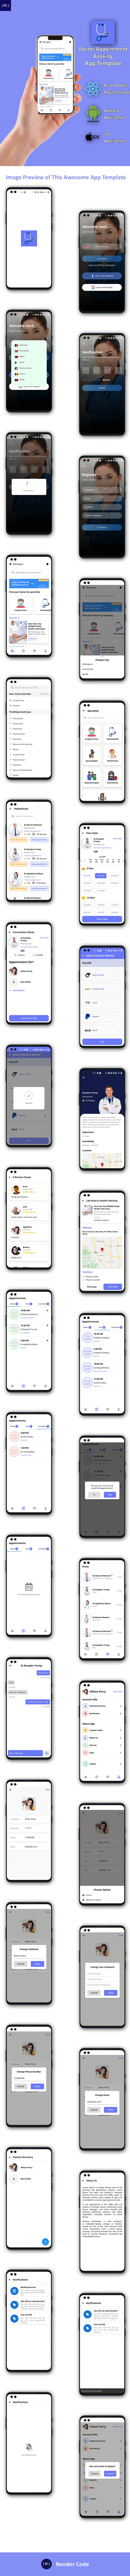 Doctor Appointment Booking App Template | React Native | 2 Apps | User App + Doctor App | MyDoctor - 5